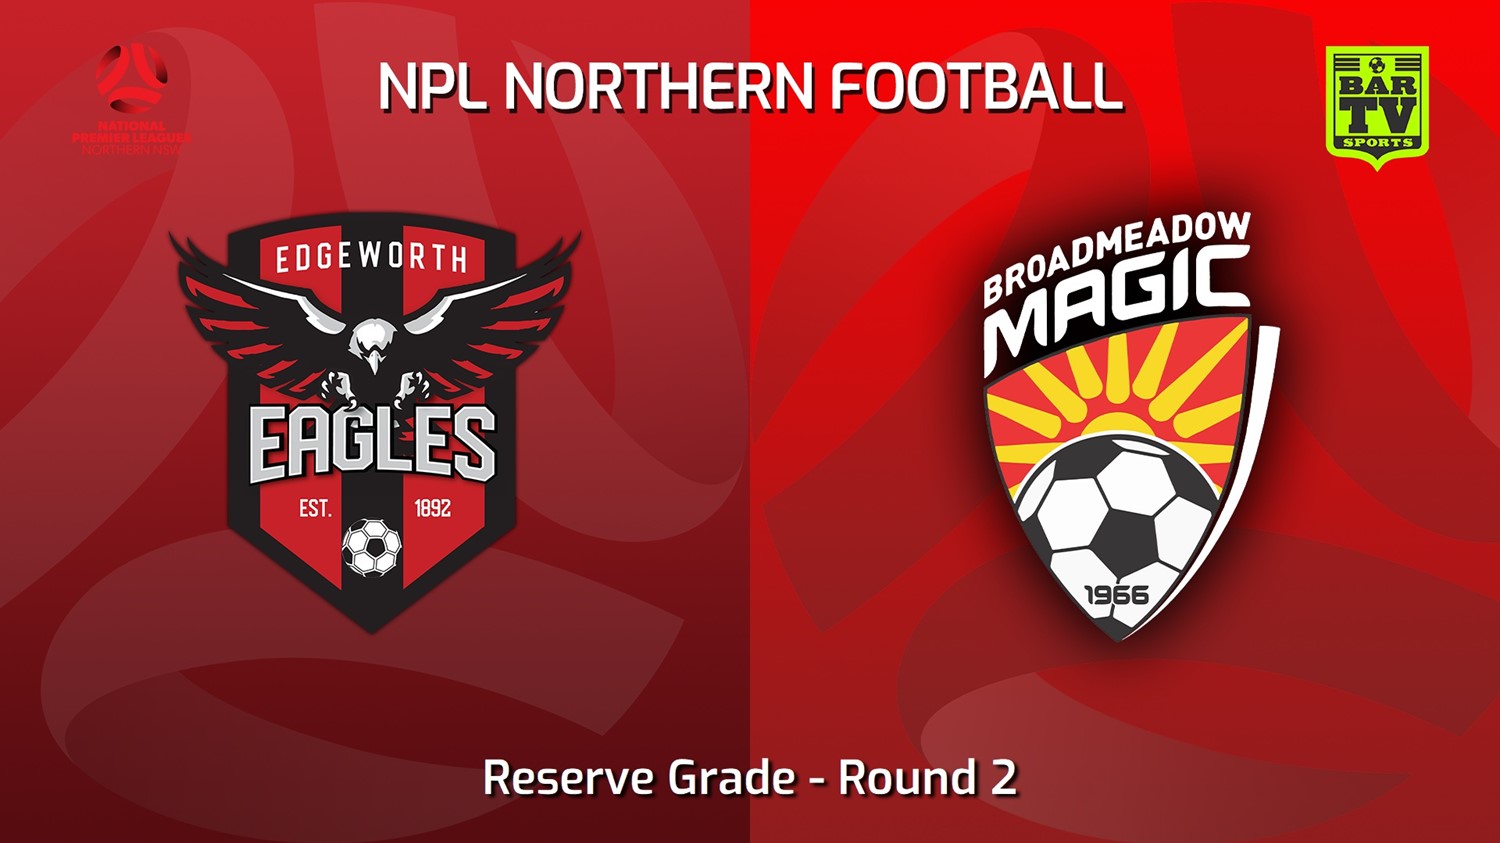 230312-NNSW NPLM Res Round 2 - Edgeworth Eagles Res v Broadmeadow Magic Res Minigame Slate Image